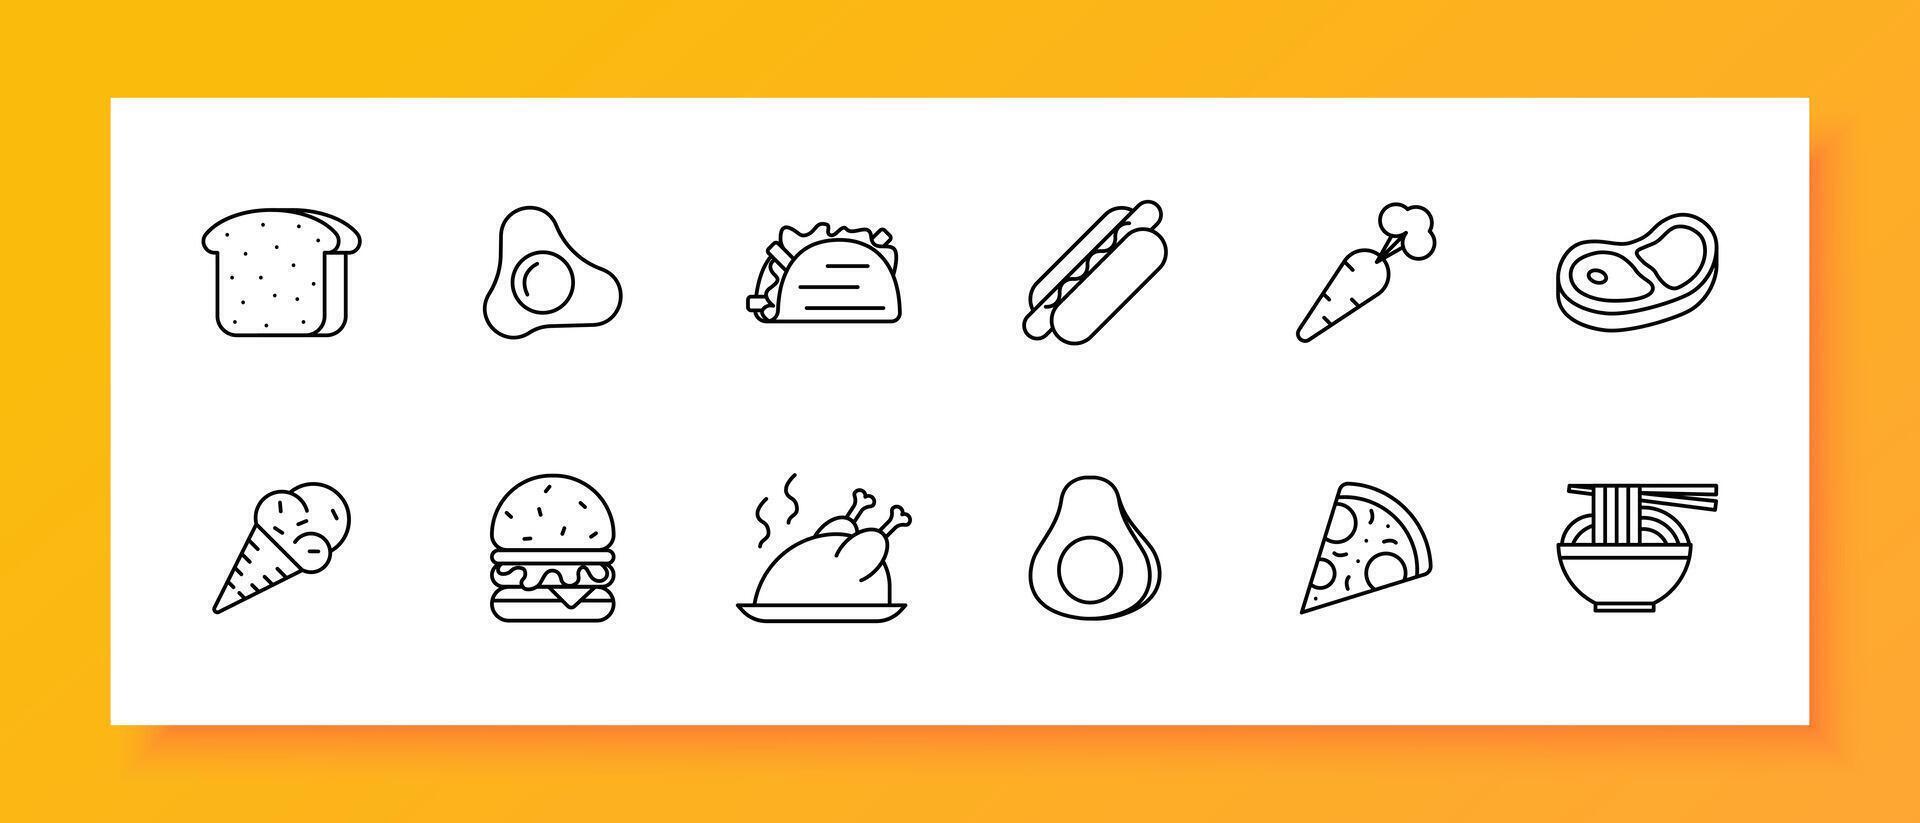 Delicacy set icon. Bread, shawarma, eggs, fried eggs, ice cream, carrots, steak, burger, sausage in dough, grilled chicken, pizza, noodles, street food, unusual food. line icon. vector